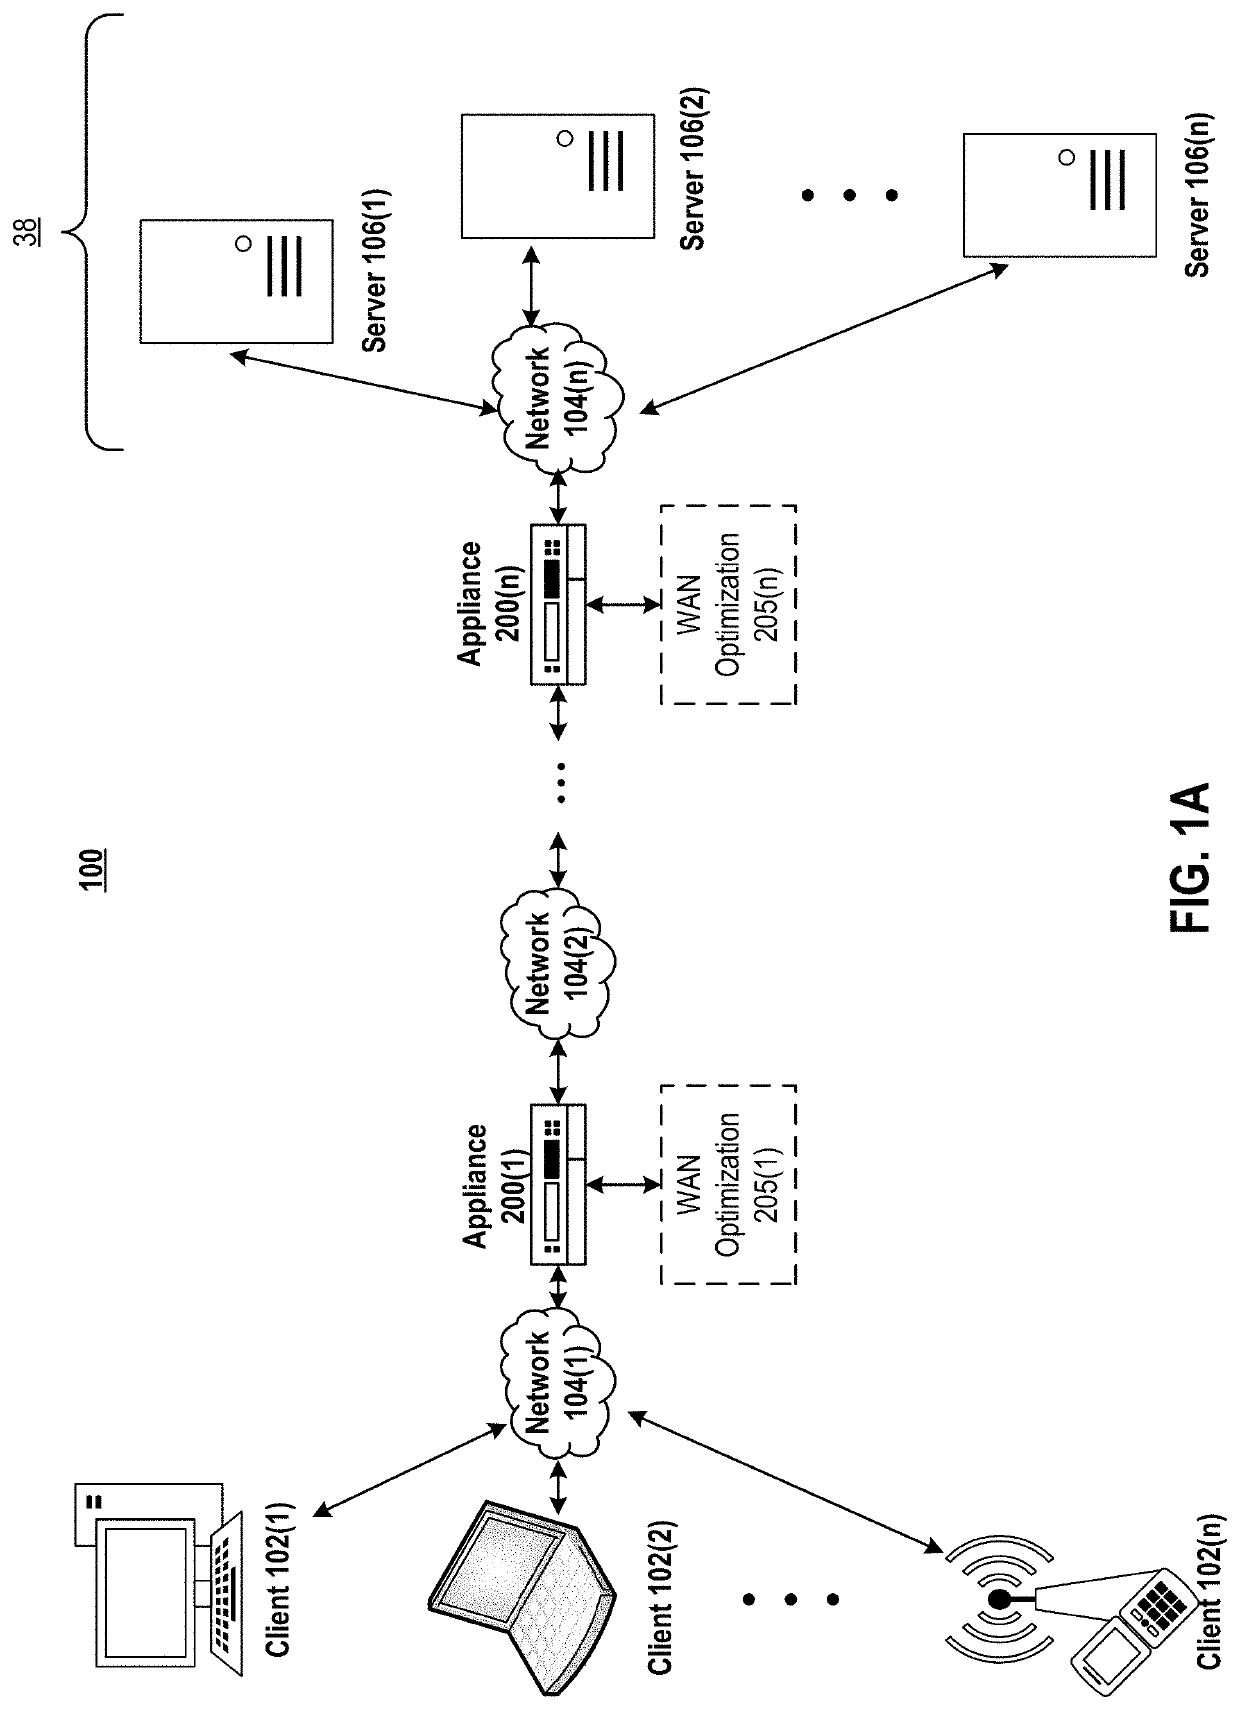 Systems and methods for using unencrypted communication tunnels